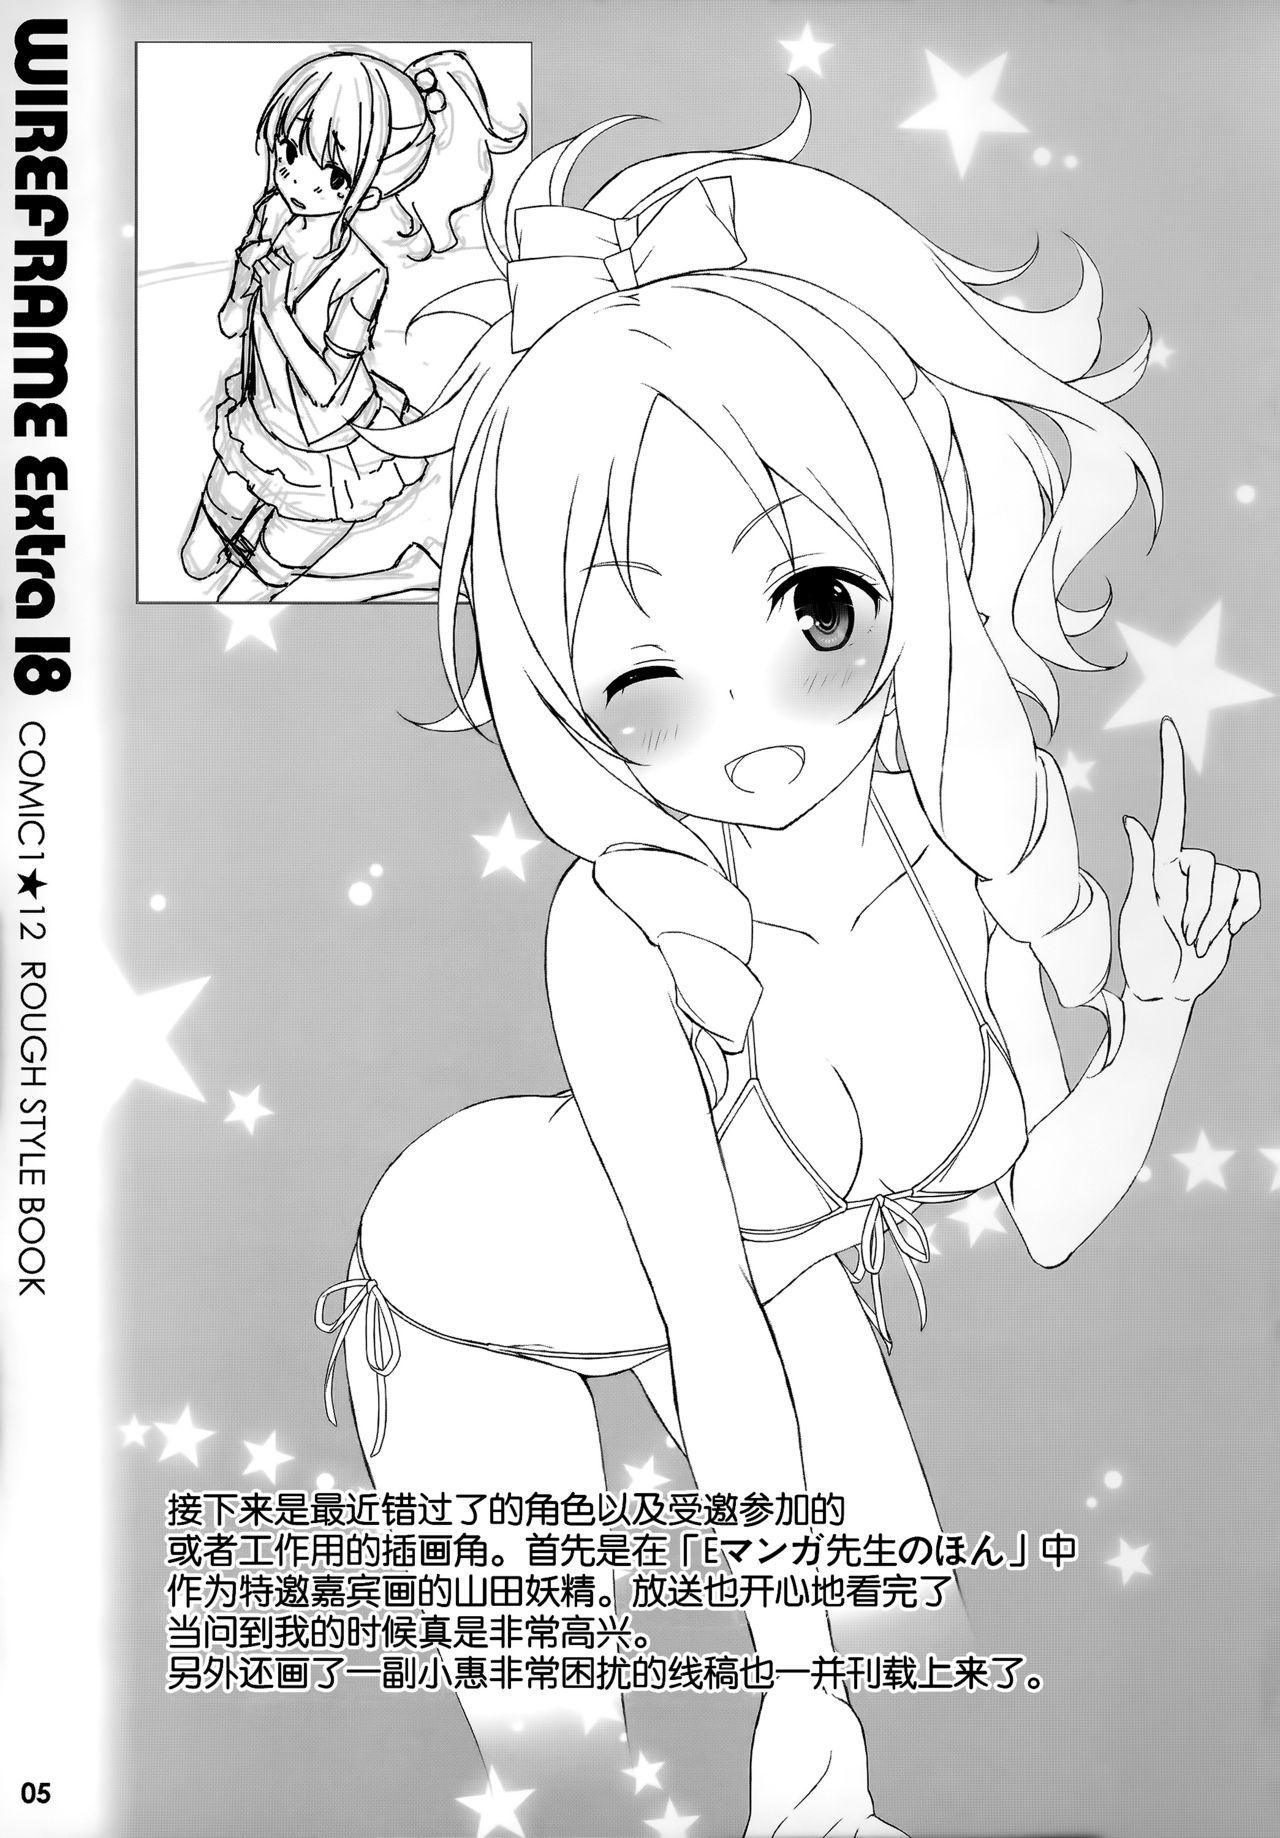 Pinoy WIREFRAME Extra 18 - Fate grand order Livecams - Page 6